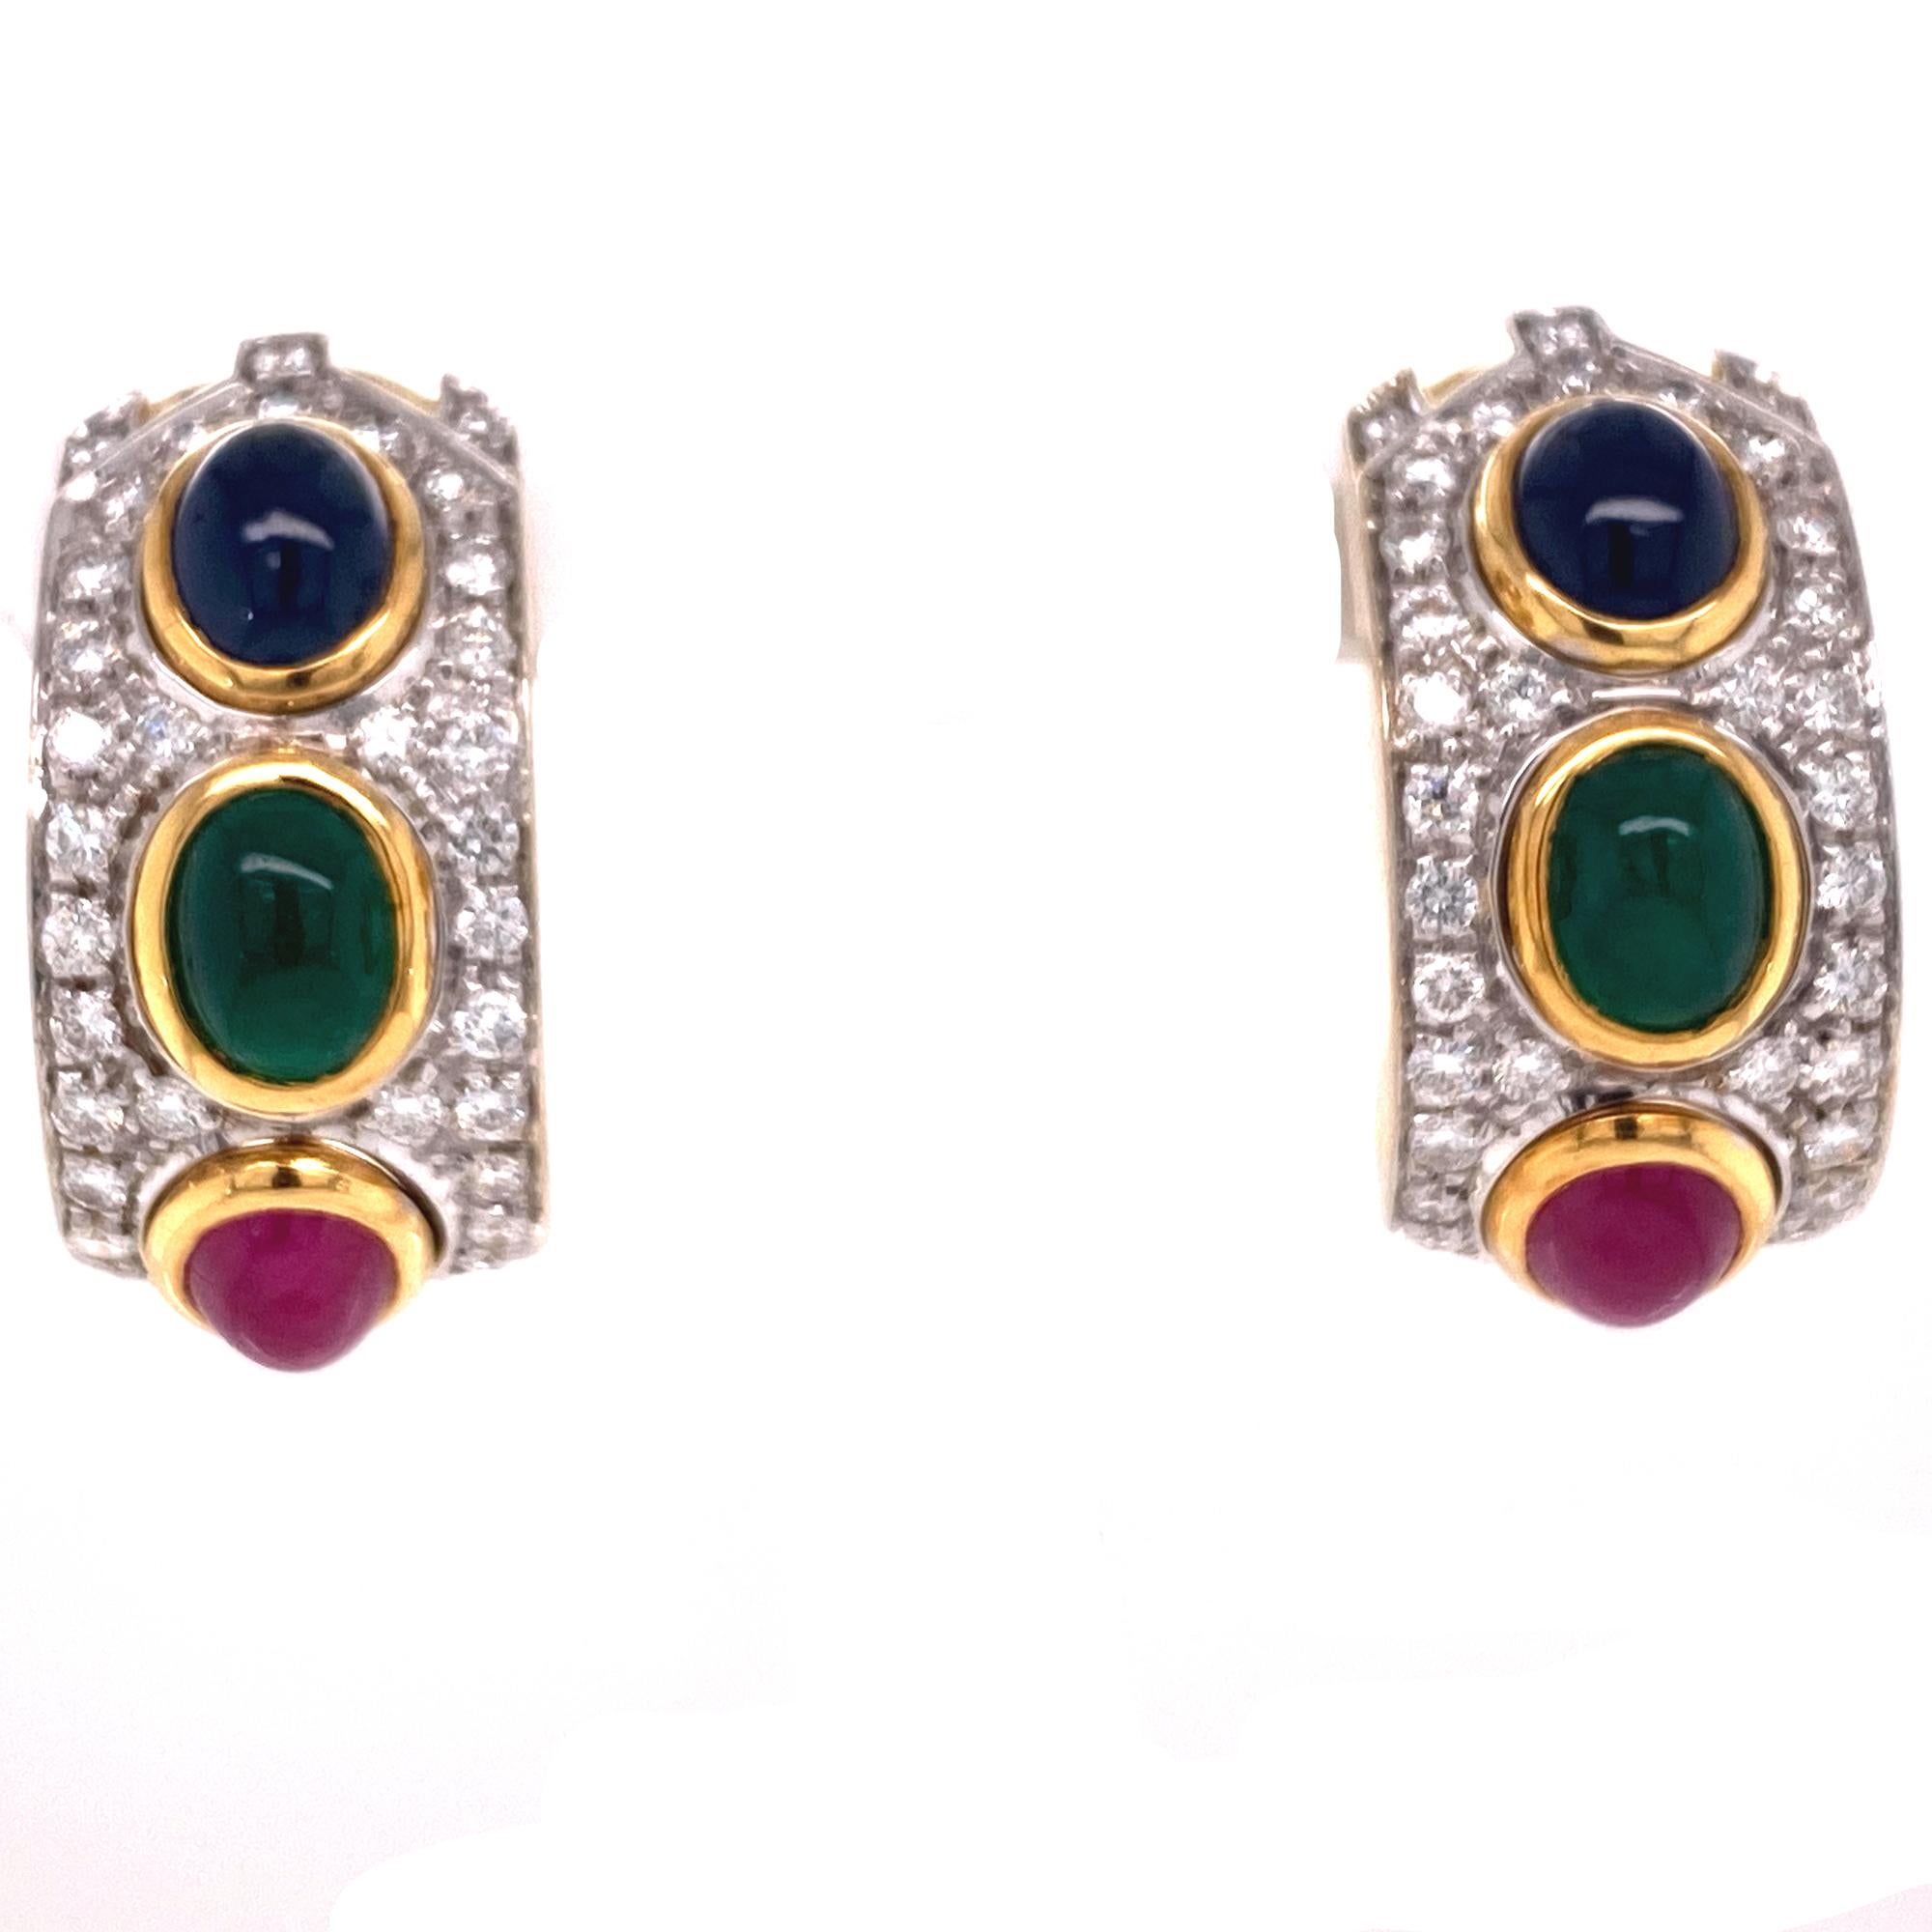 Stunning diamond, sapphire, emerald, and ruby earrings crafted in 18 karat yellow and white gold. These 1960's earrings feature 2.00 CTW round brilliant cut diamonds graded F-G/VS. Cabochon emerald, sapphire, and ruby are set down the center. The